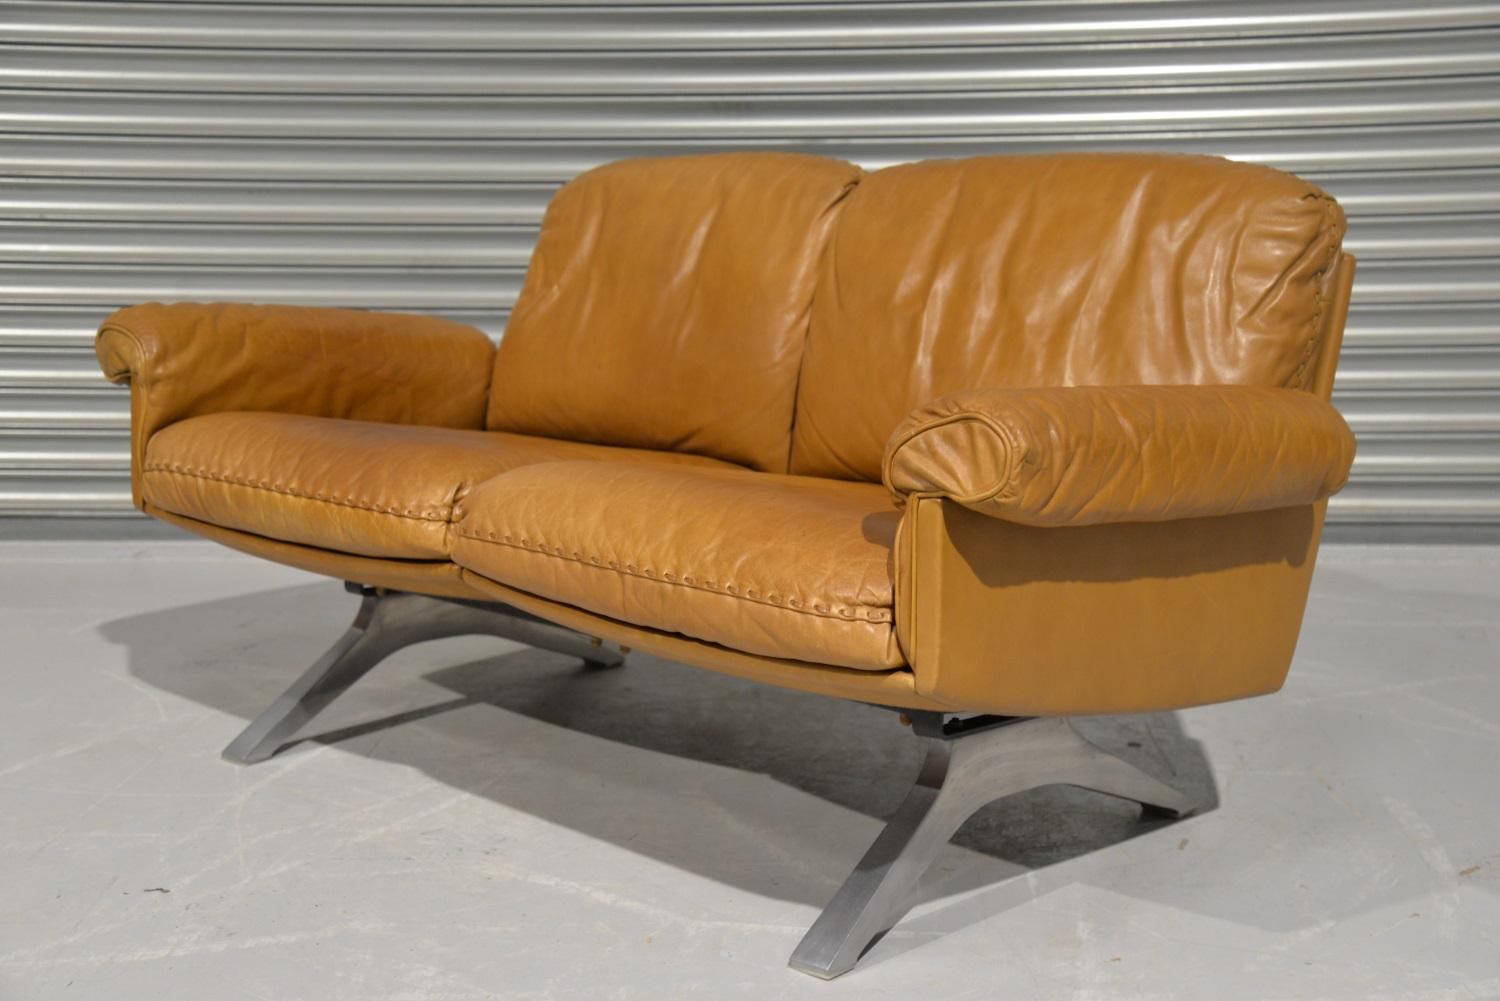 Discounted airfreight for our US and International customers (from 2 weeks door to door)

We ae delighted to bring to you a de Sede DS 31 two-seat sofa loveseat is in beautiful soft cognac aniline leather with superb whipstitch edge detail. Hand